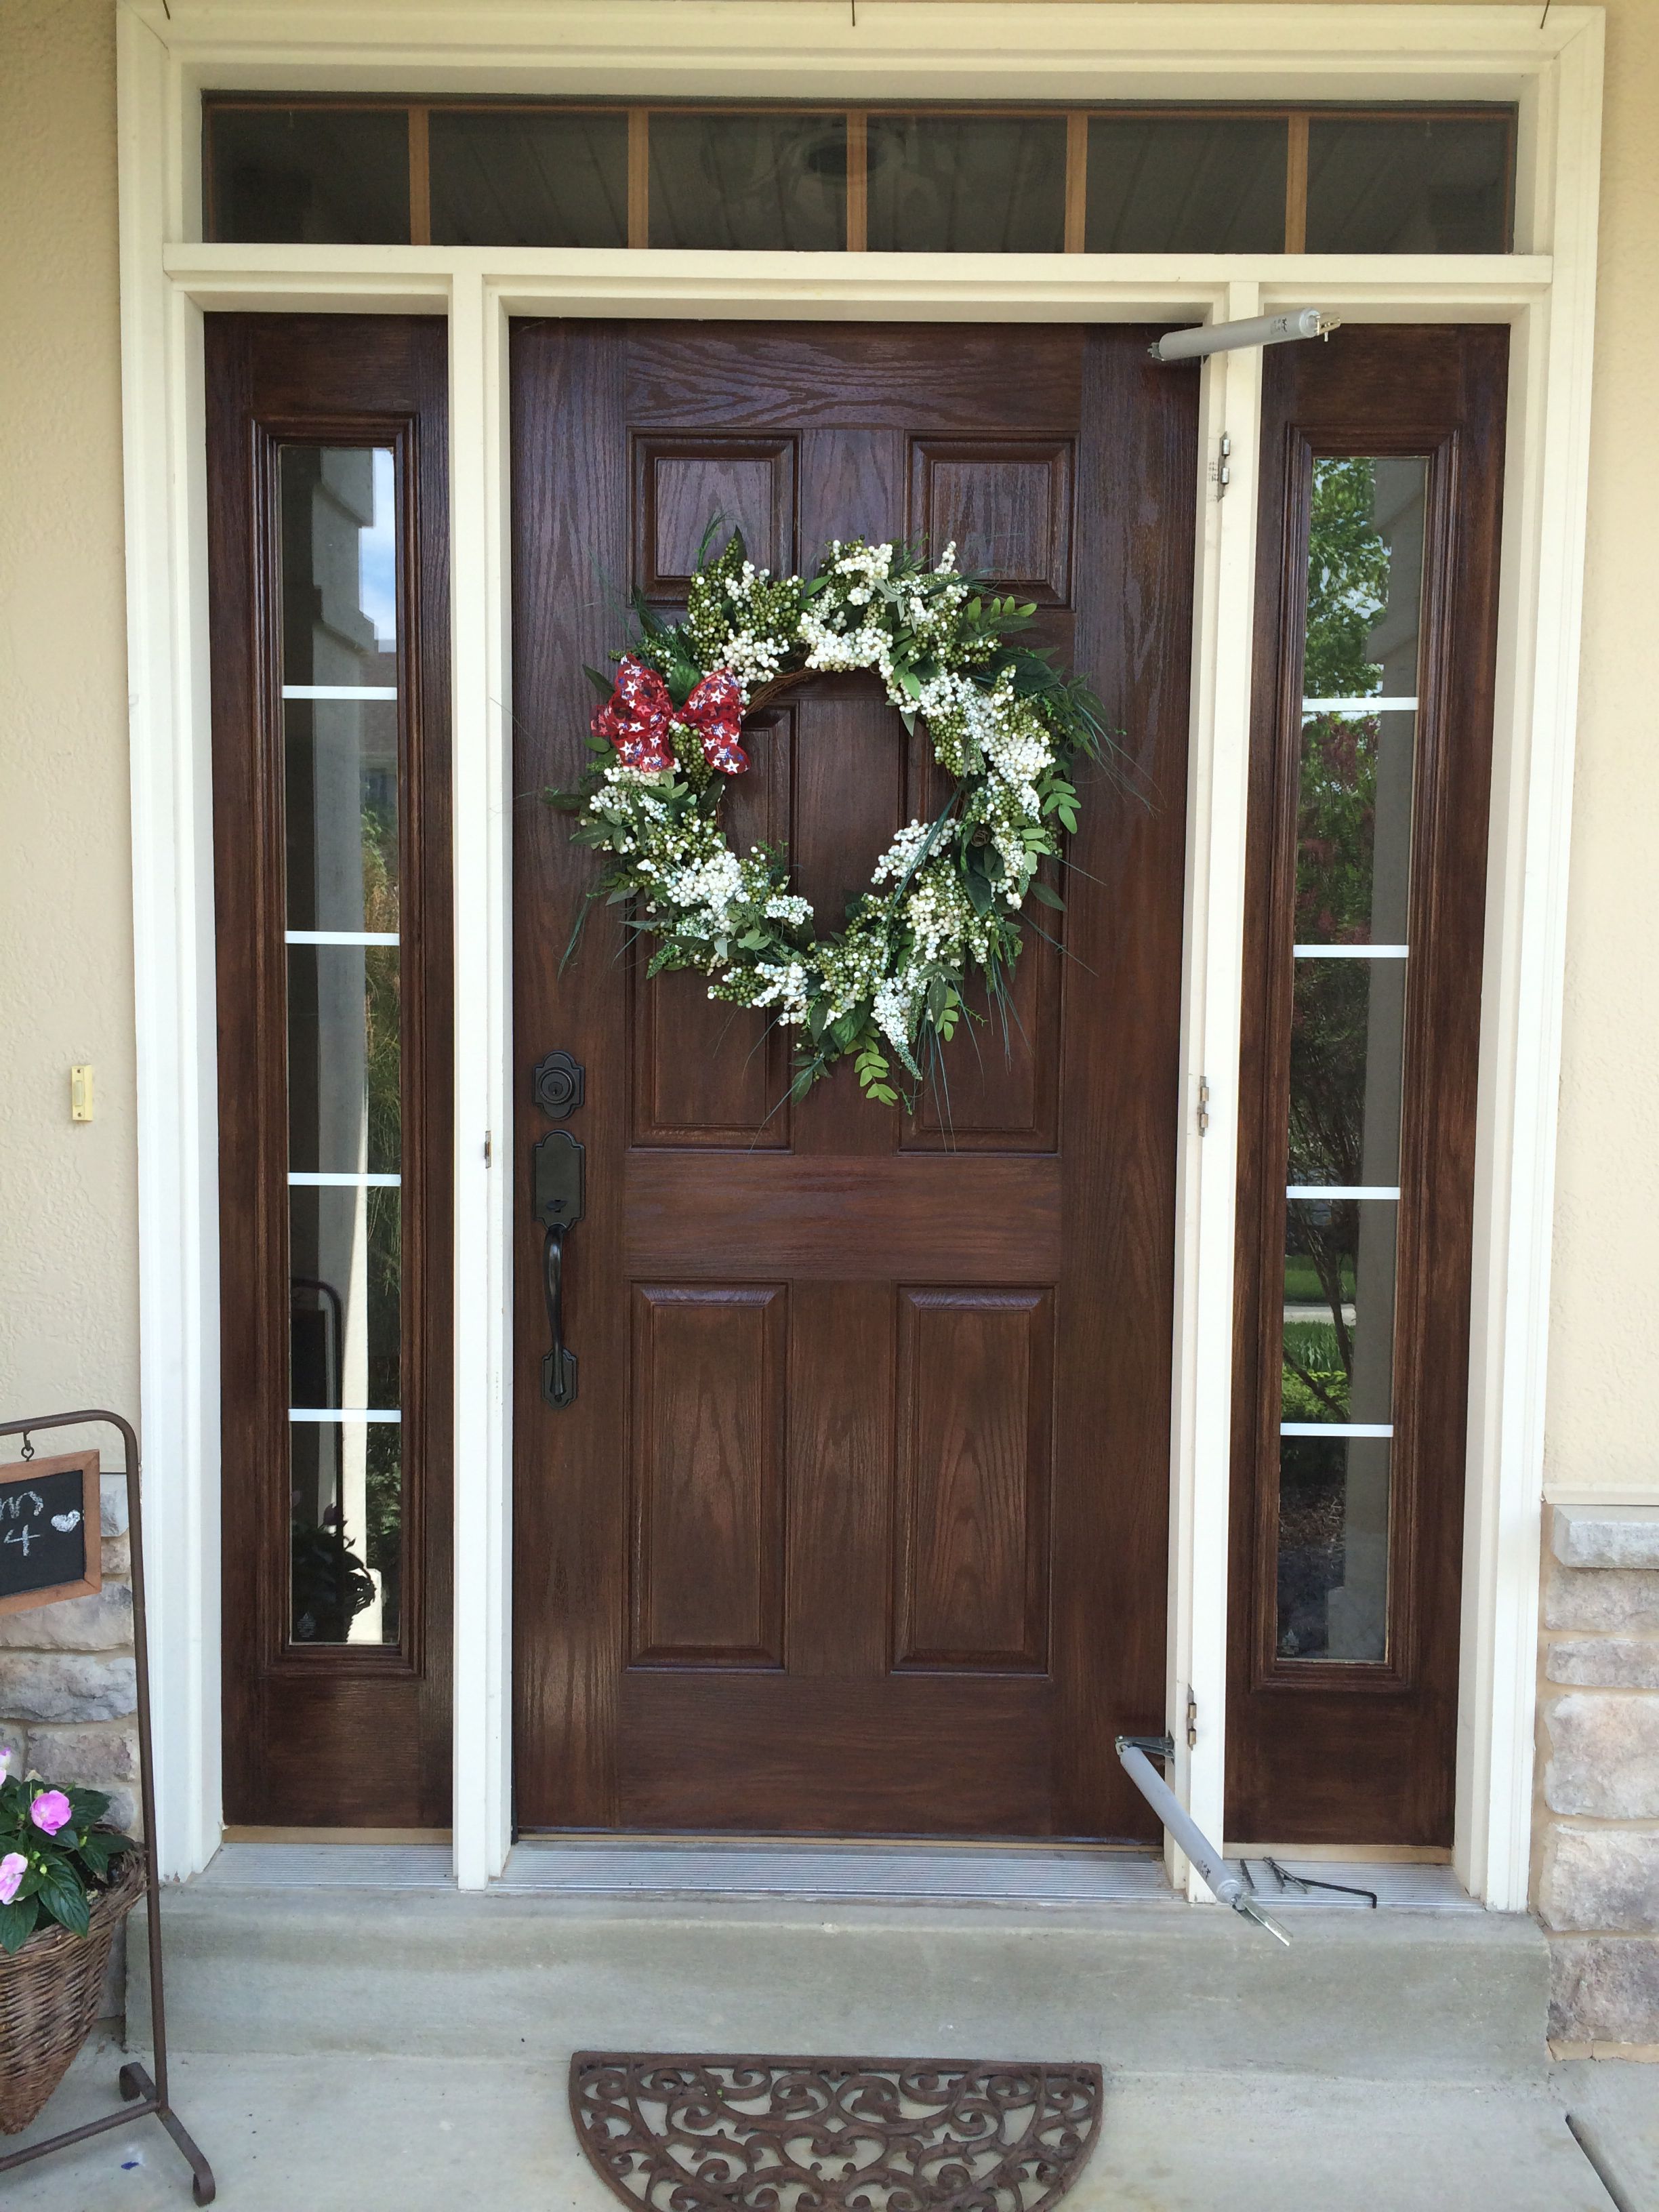 Gel stained fiberglass door, I used old masters gel stain over my ...